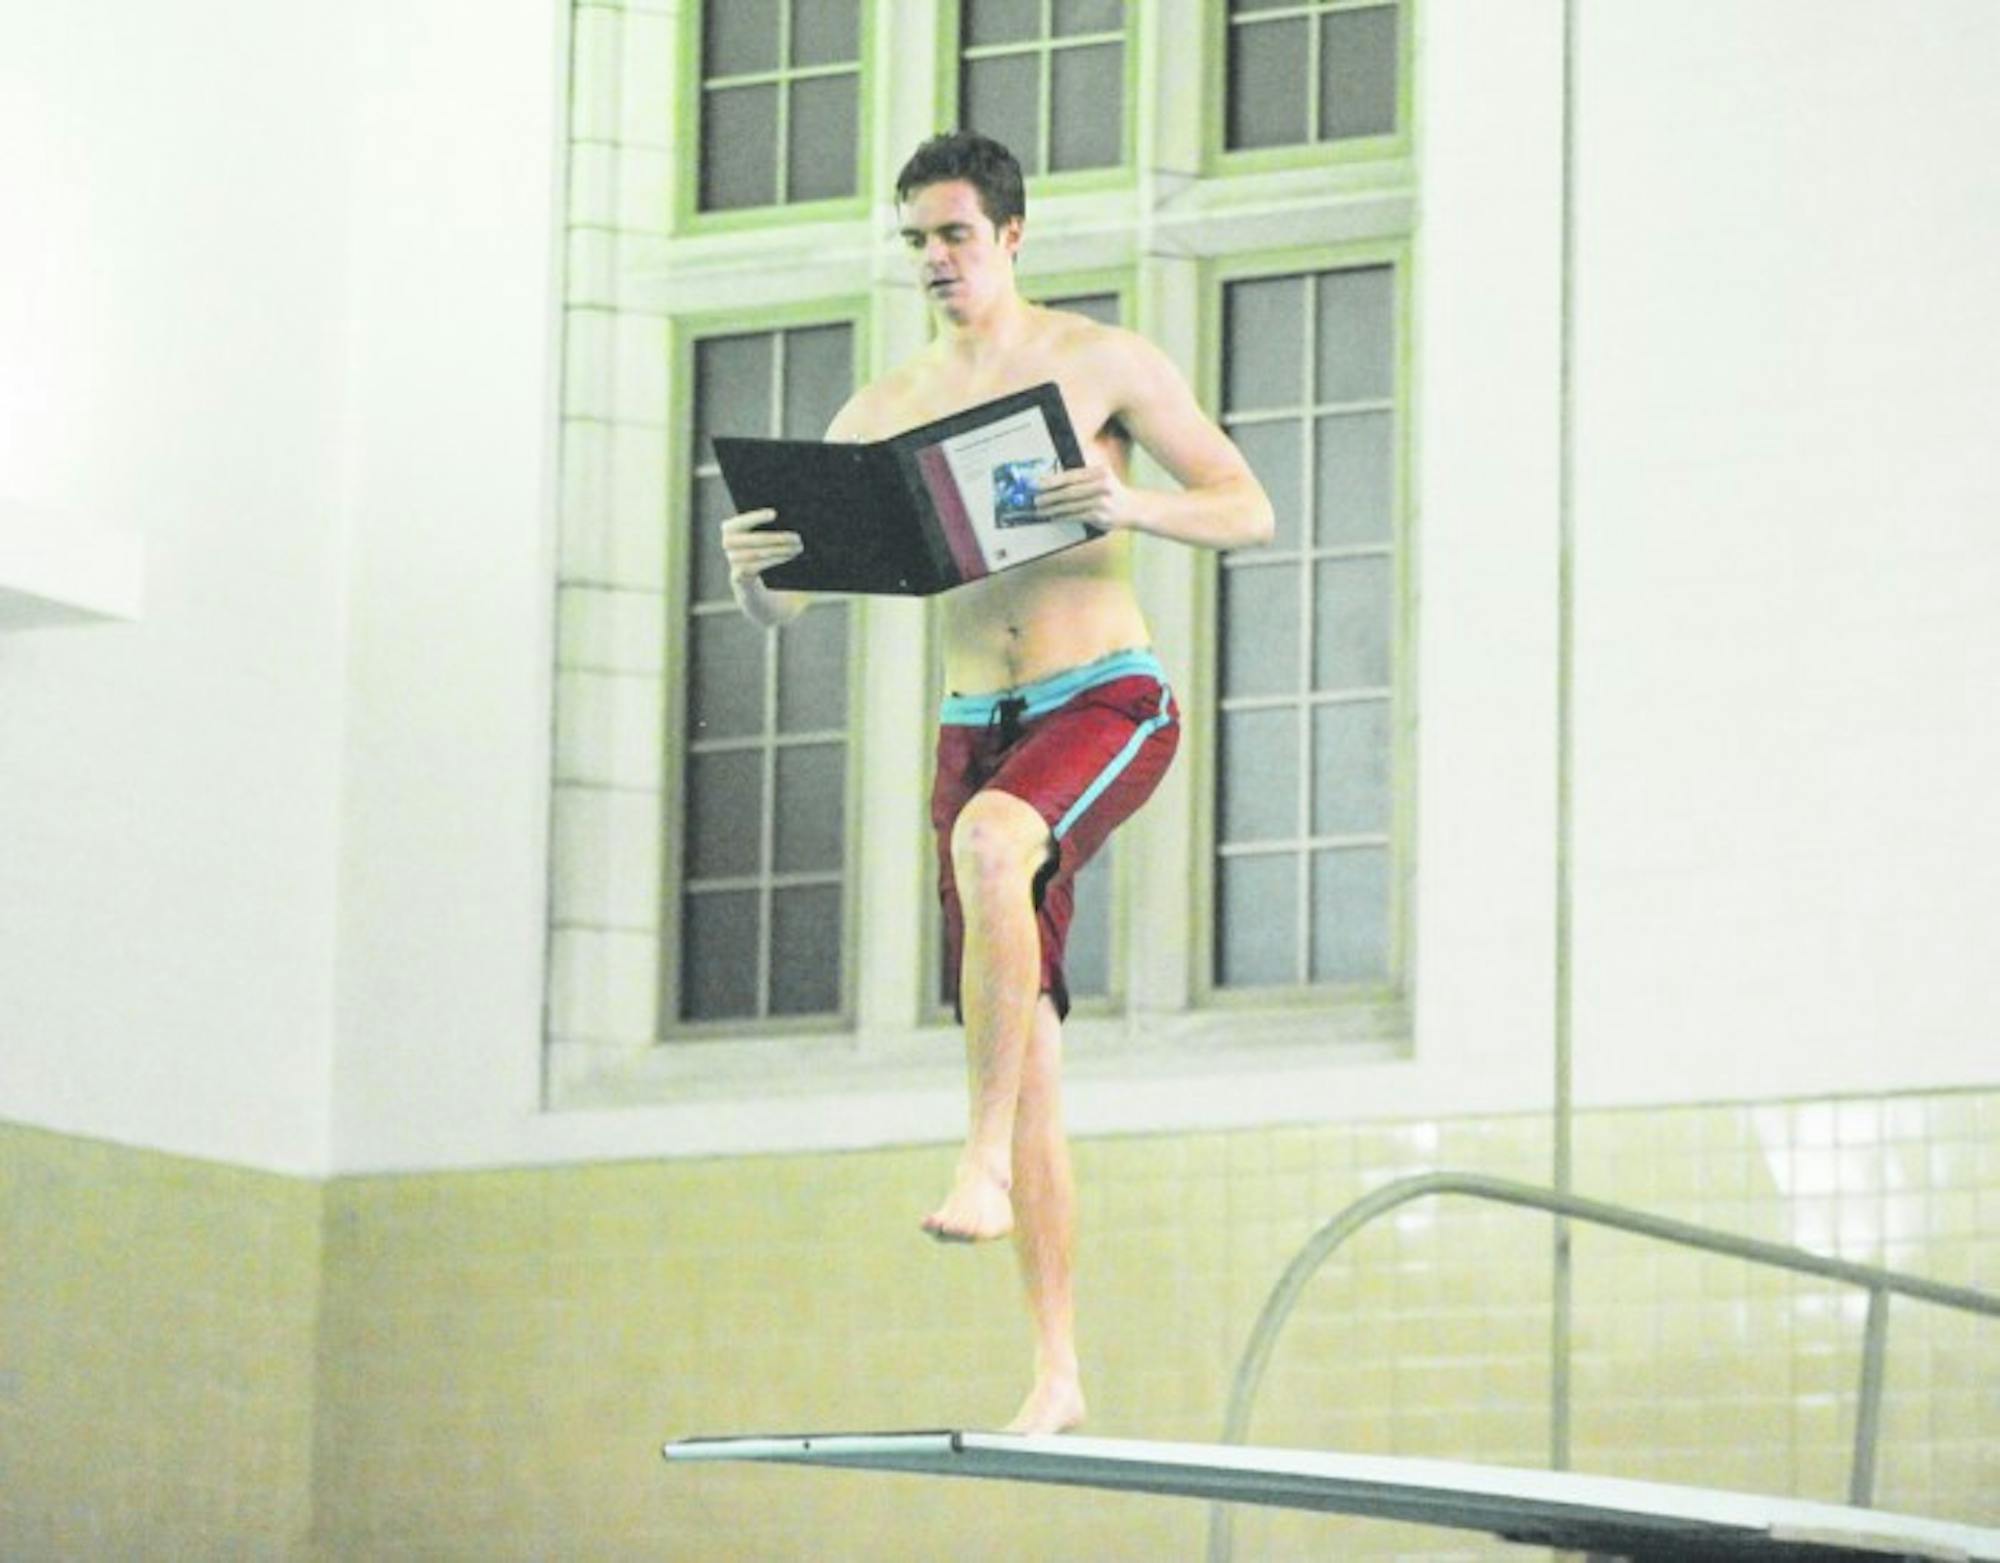 Sophomore Jack Waltrich prepares to jump off a Rockne Memorial diving board while pretending to study as part of the dorm’s event.